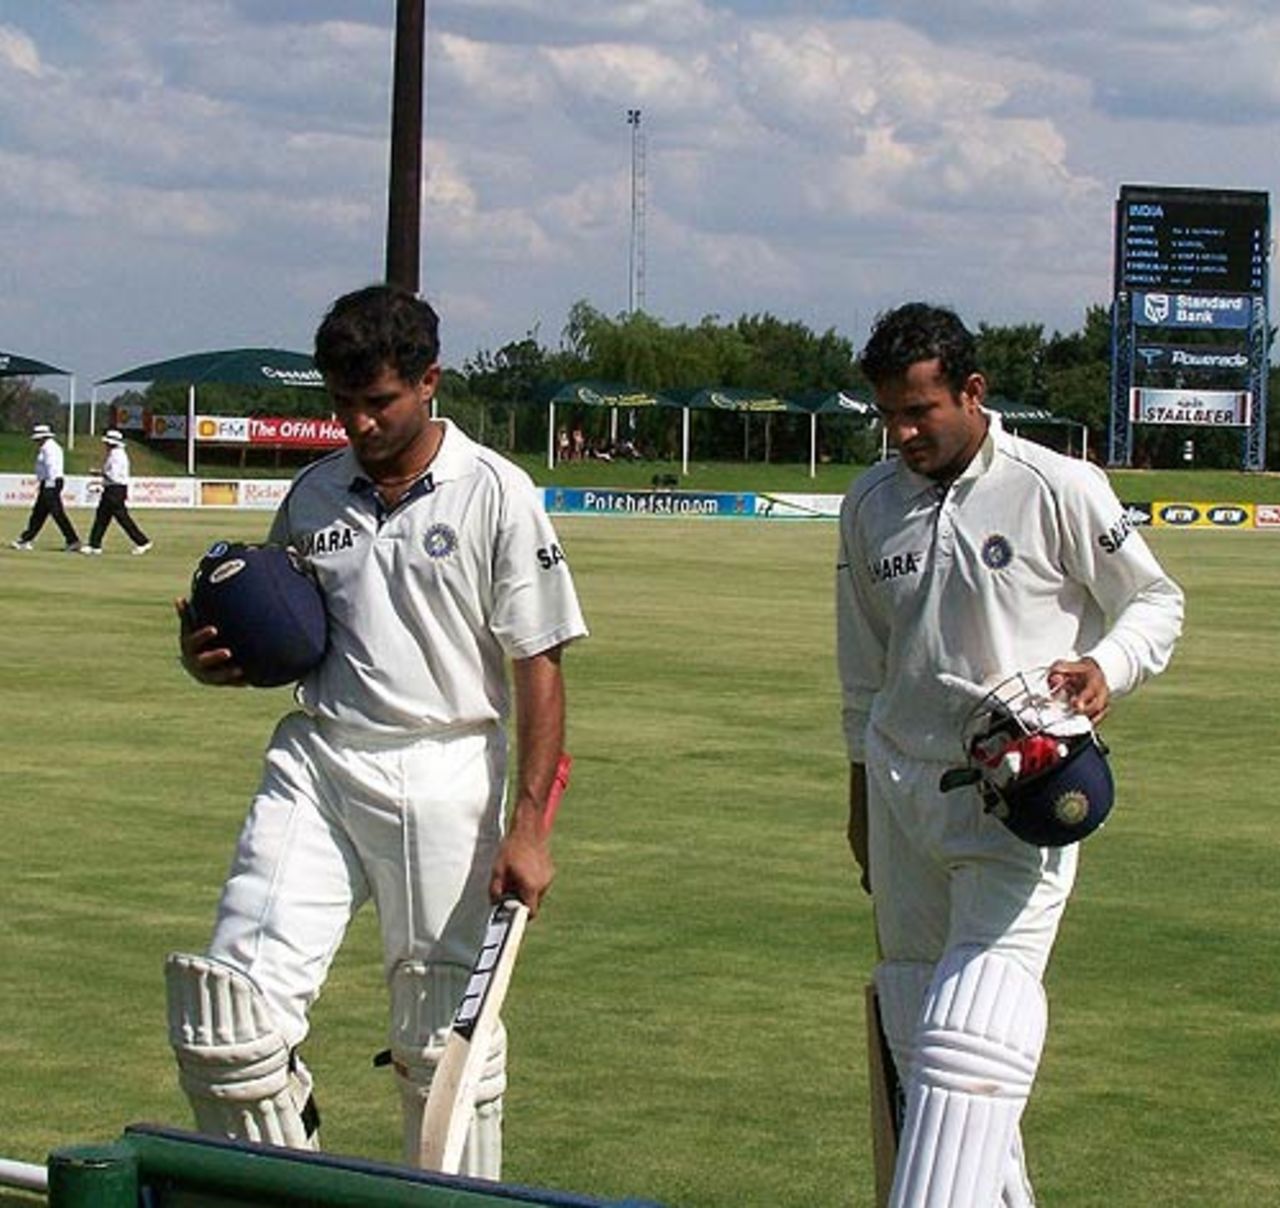 Sourav Ganguly and Irfan Pathan walk back to the pavilion for the tea interval, Rest of South Africa v Indians, 1st day, Potchefstroom